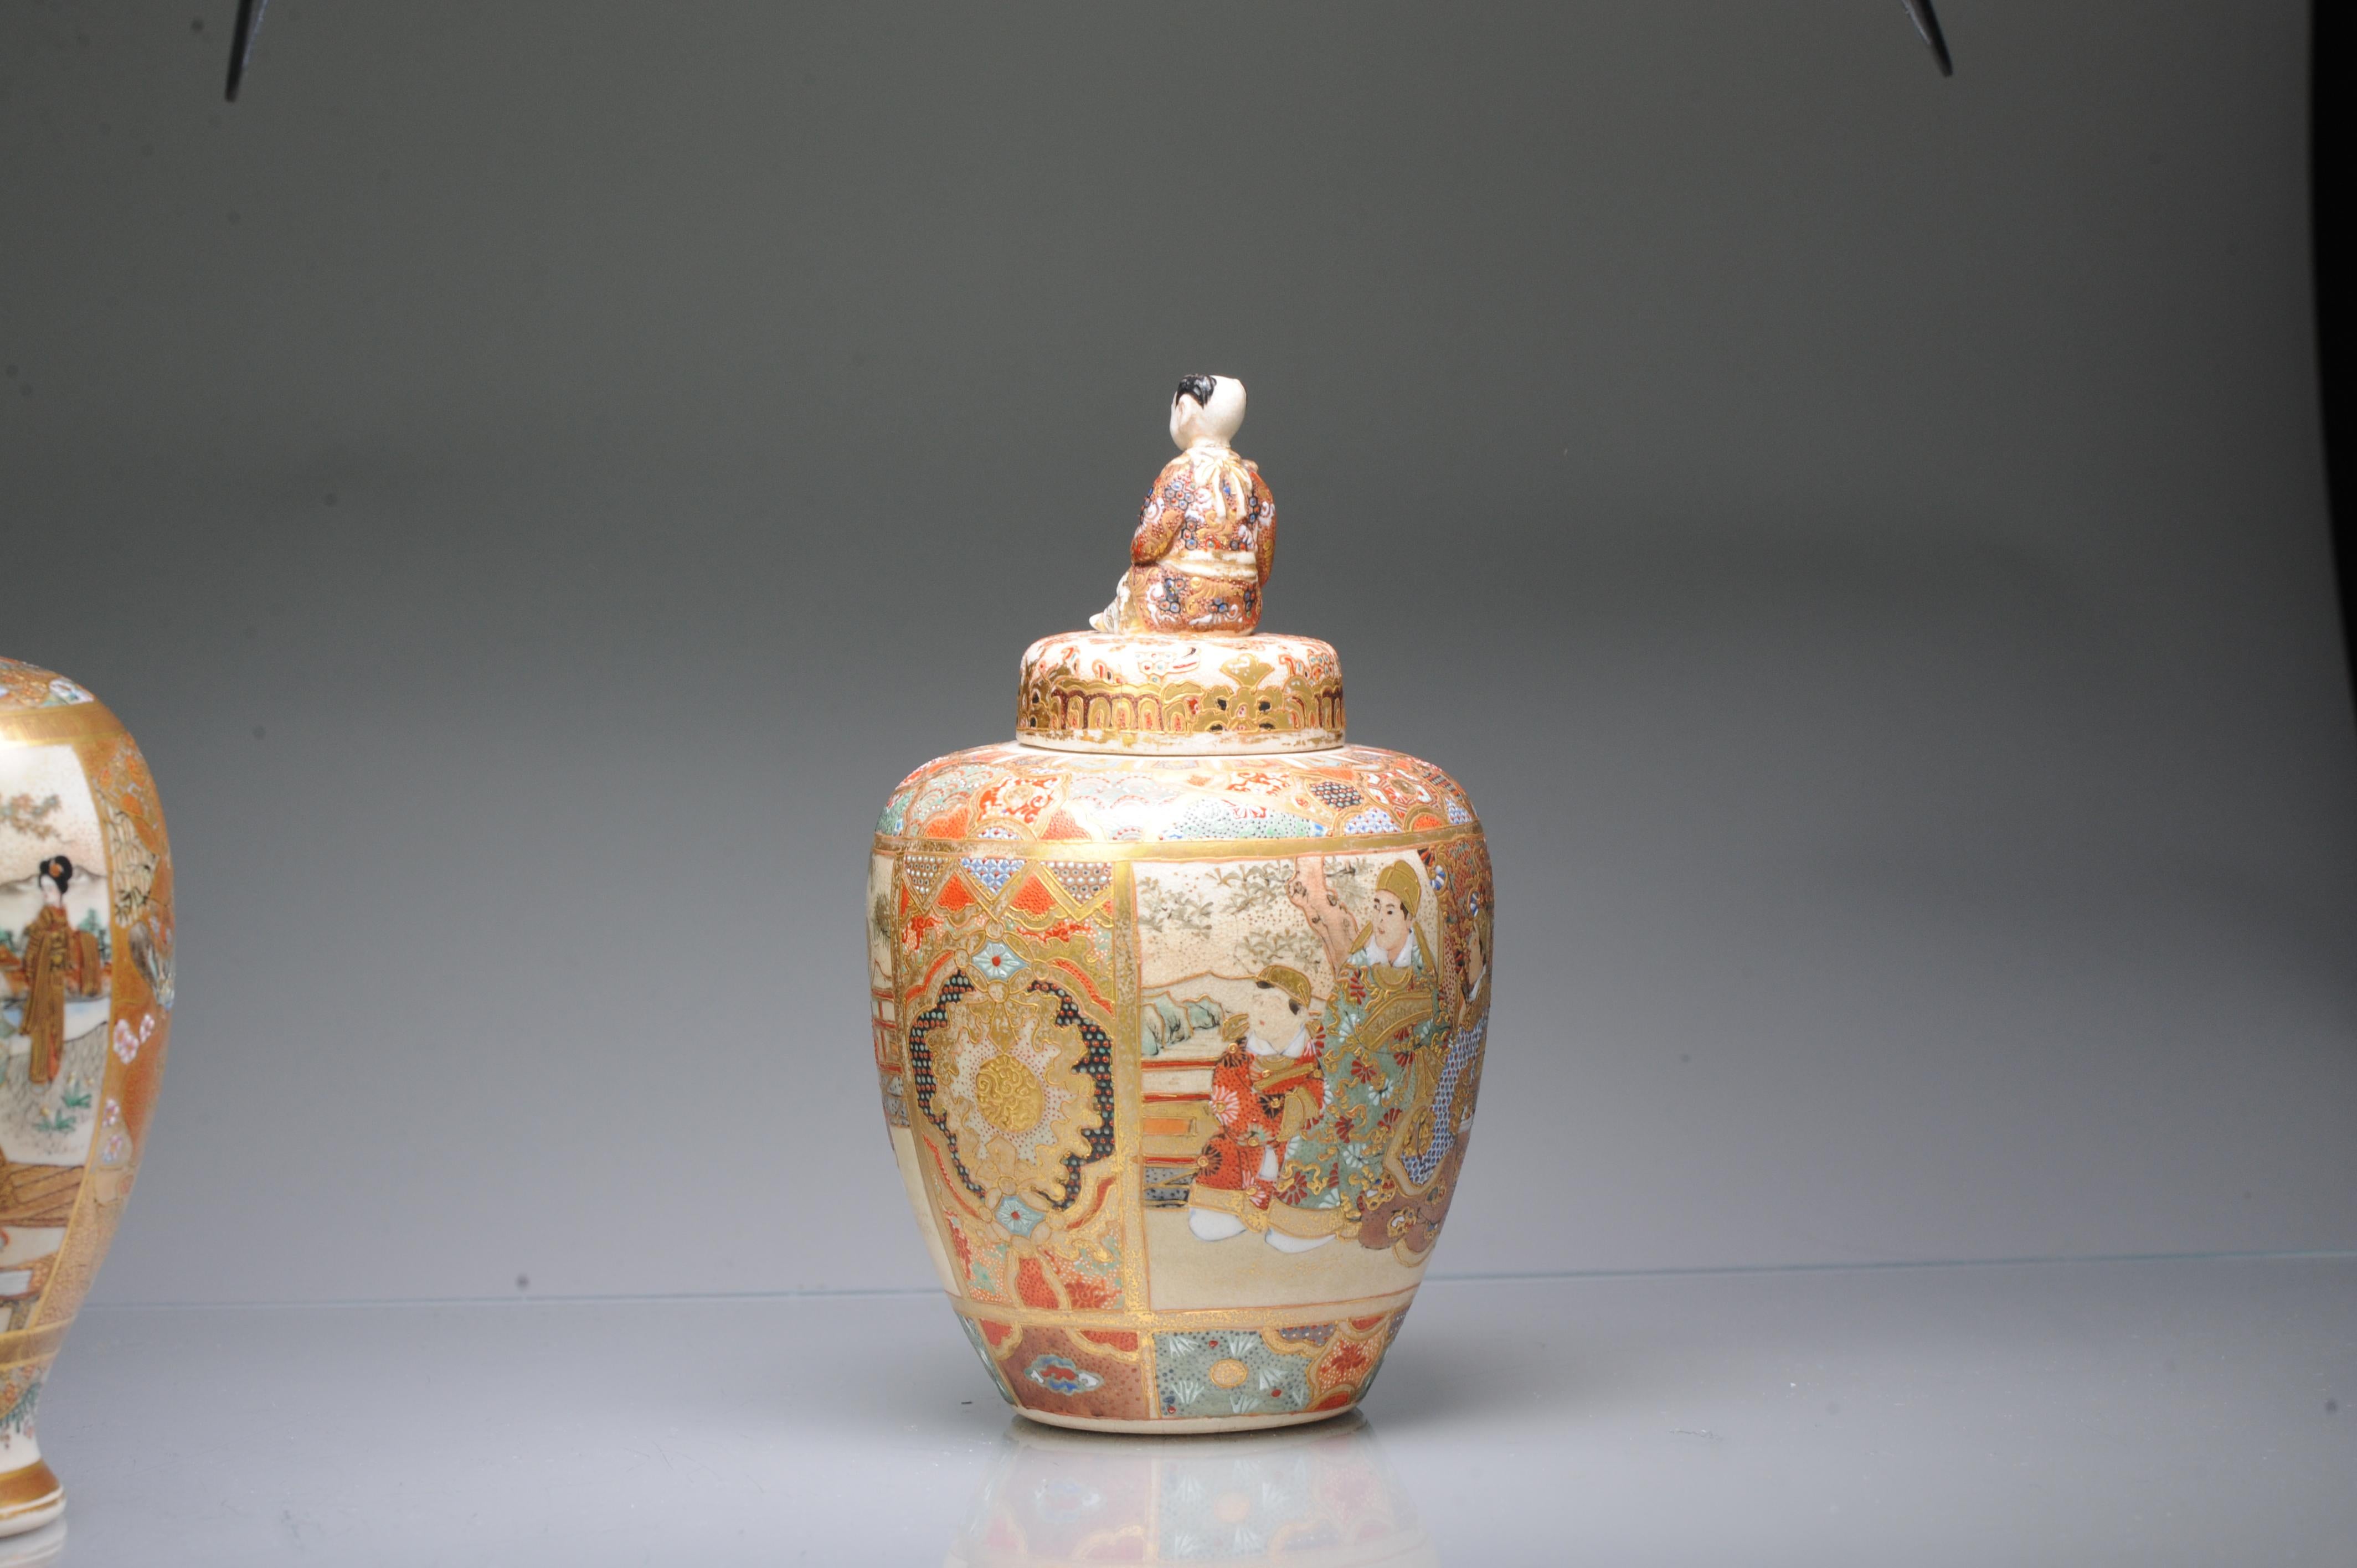 19th Century Antique Ca 1900 Japanese Satsuma Jar with Figures Richly Decorated Unmarked For Sale